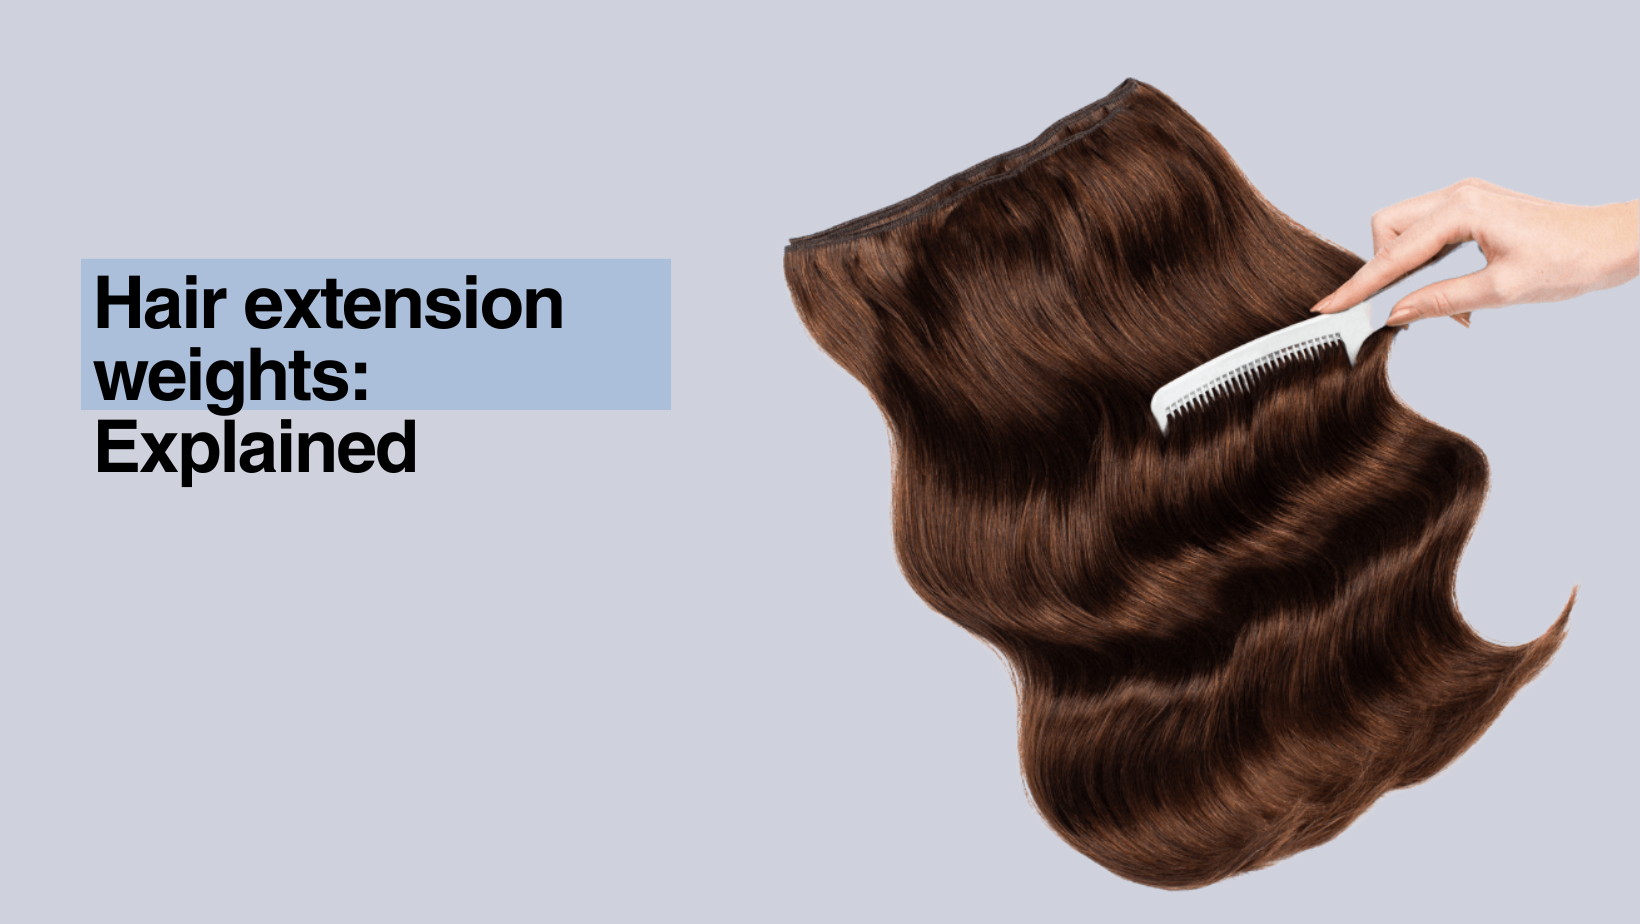 Hair Extensions Weight : Explained